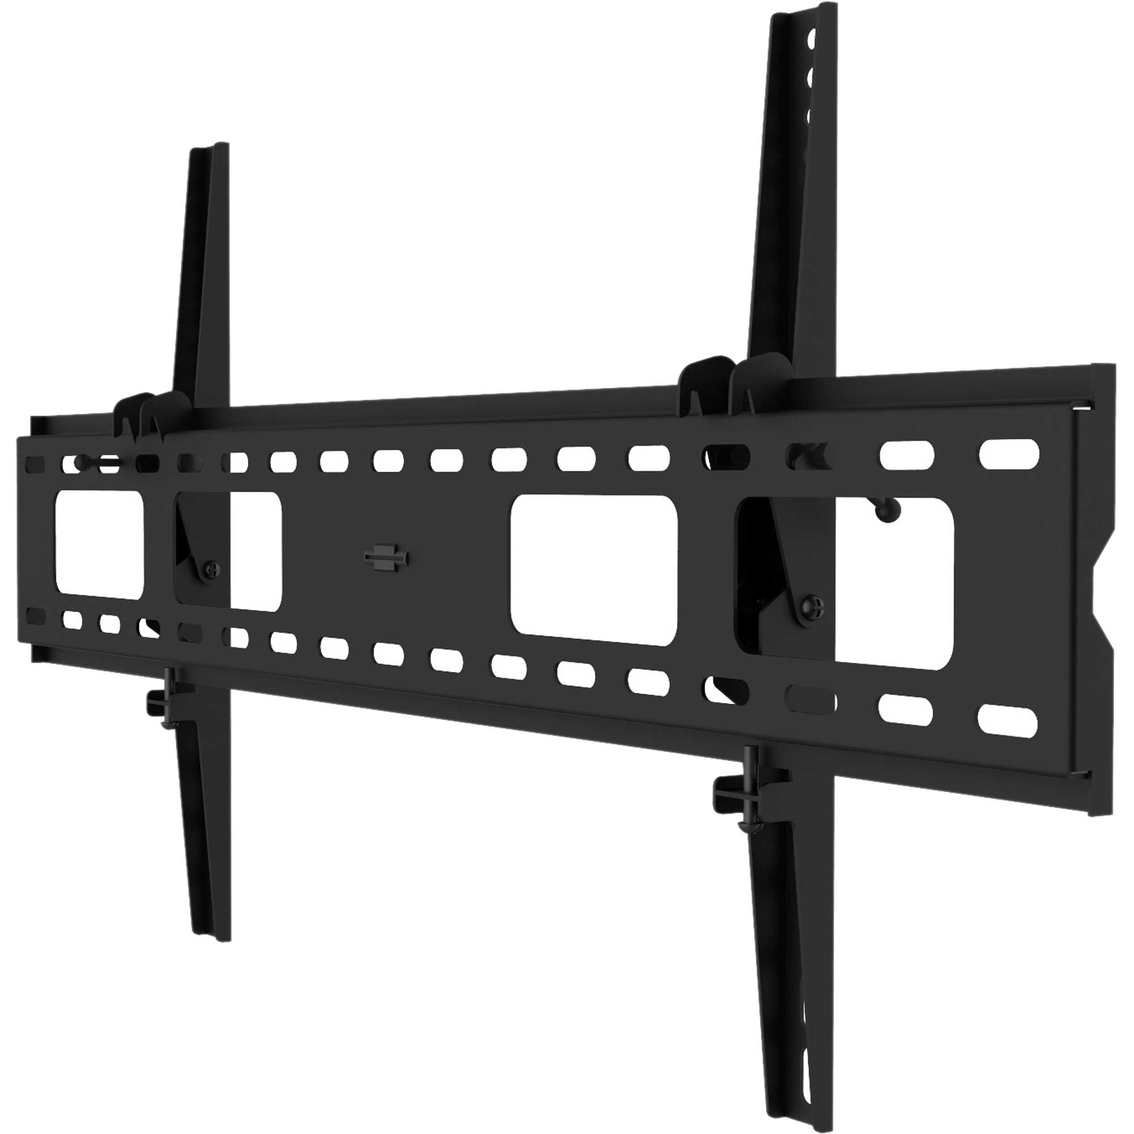 ProMounts Tilt TV Wall Mount for 50 to 90 in. TVs up to 165 lb. - Image 9 of 9